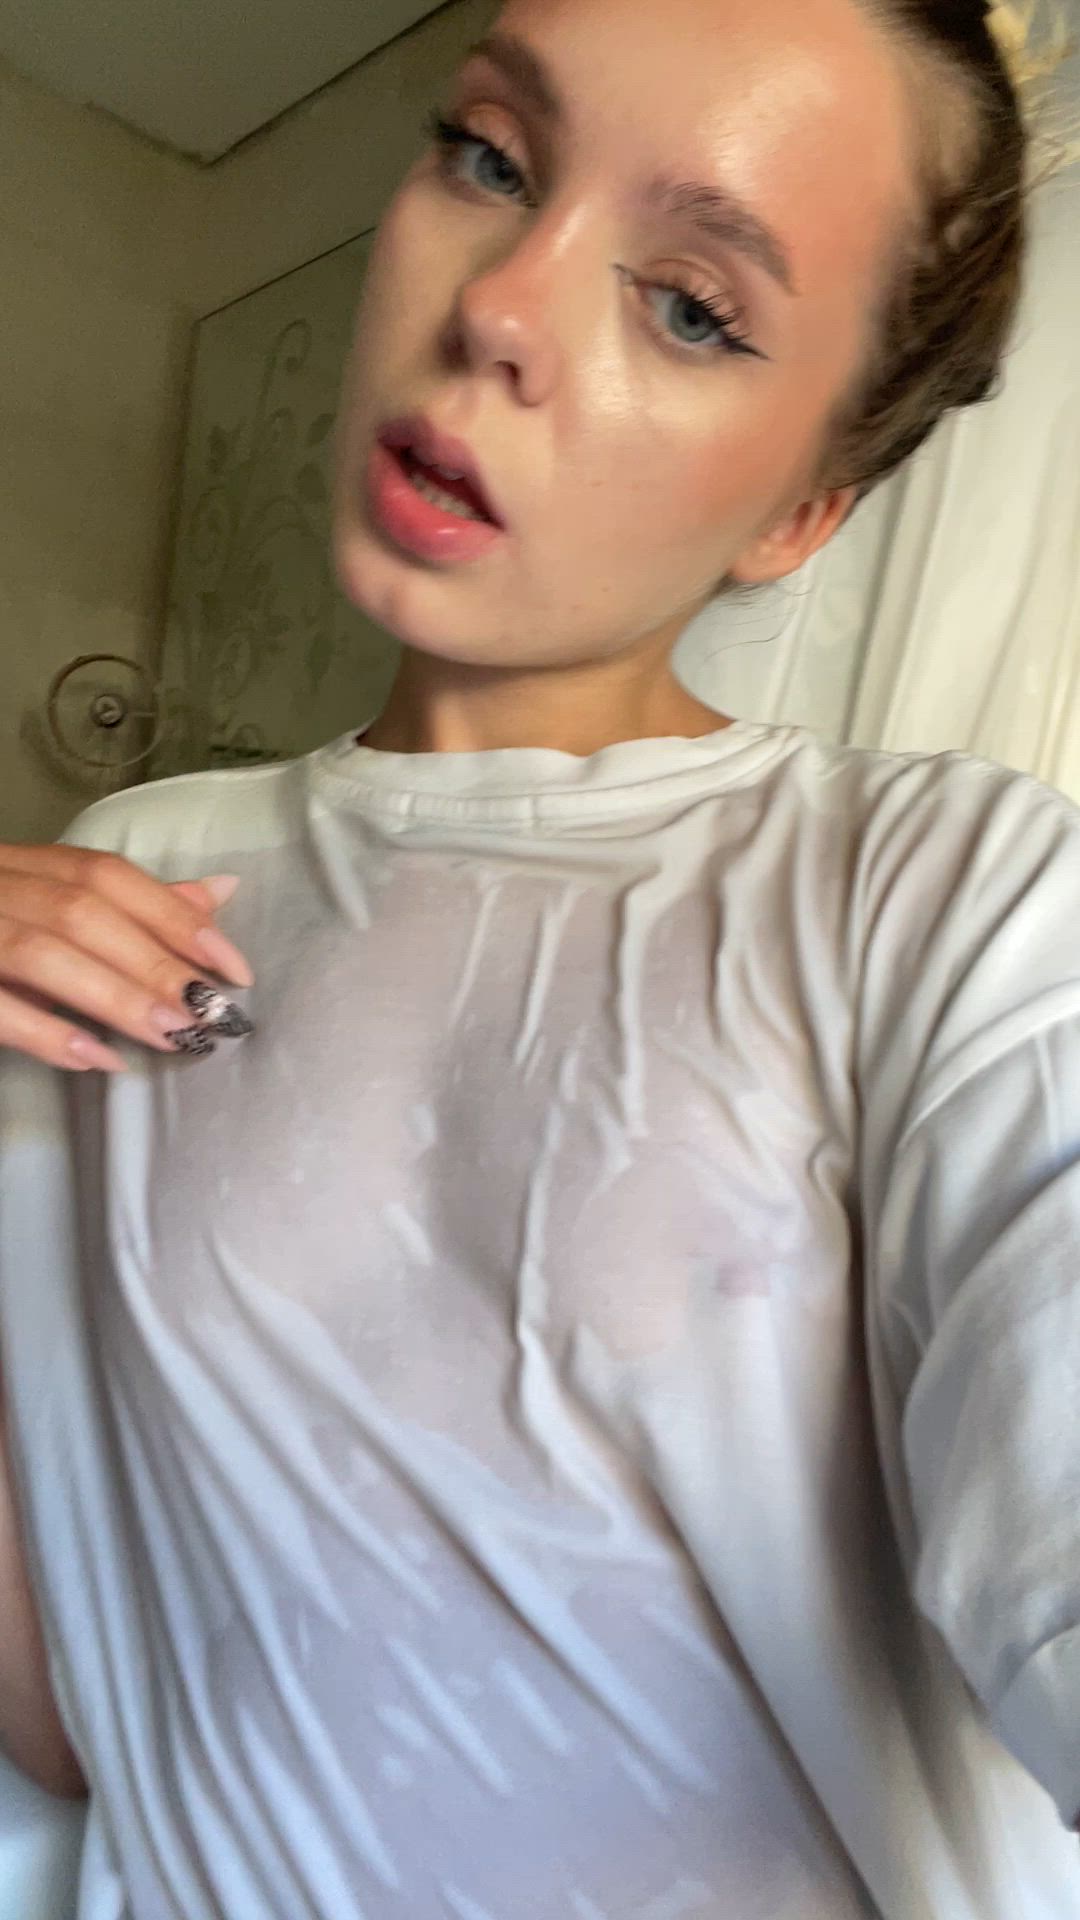 Tits porn video with onlyfans model celtysins <strong>@celtyxxx</strong>